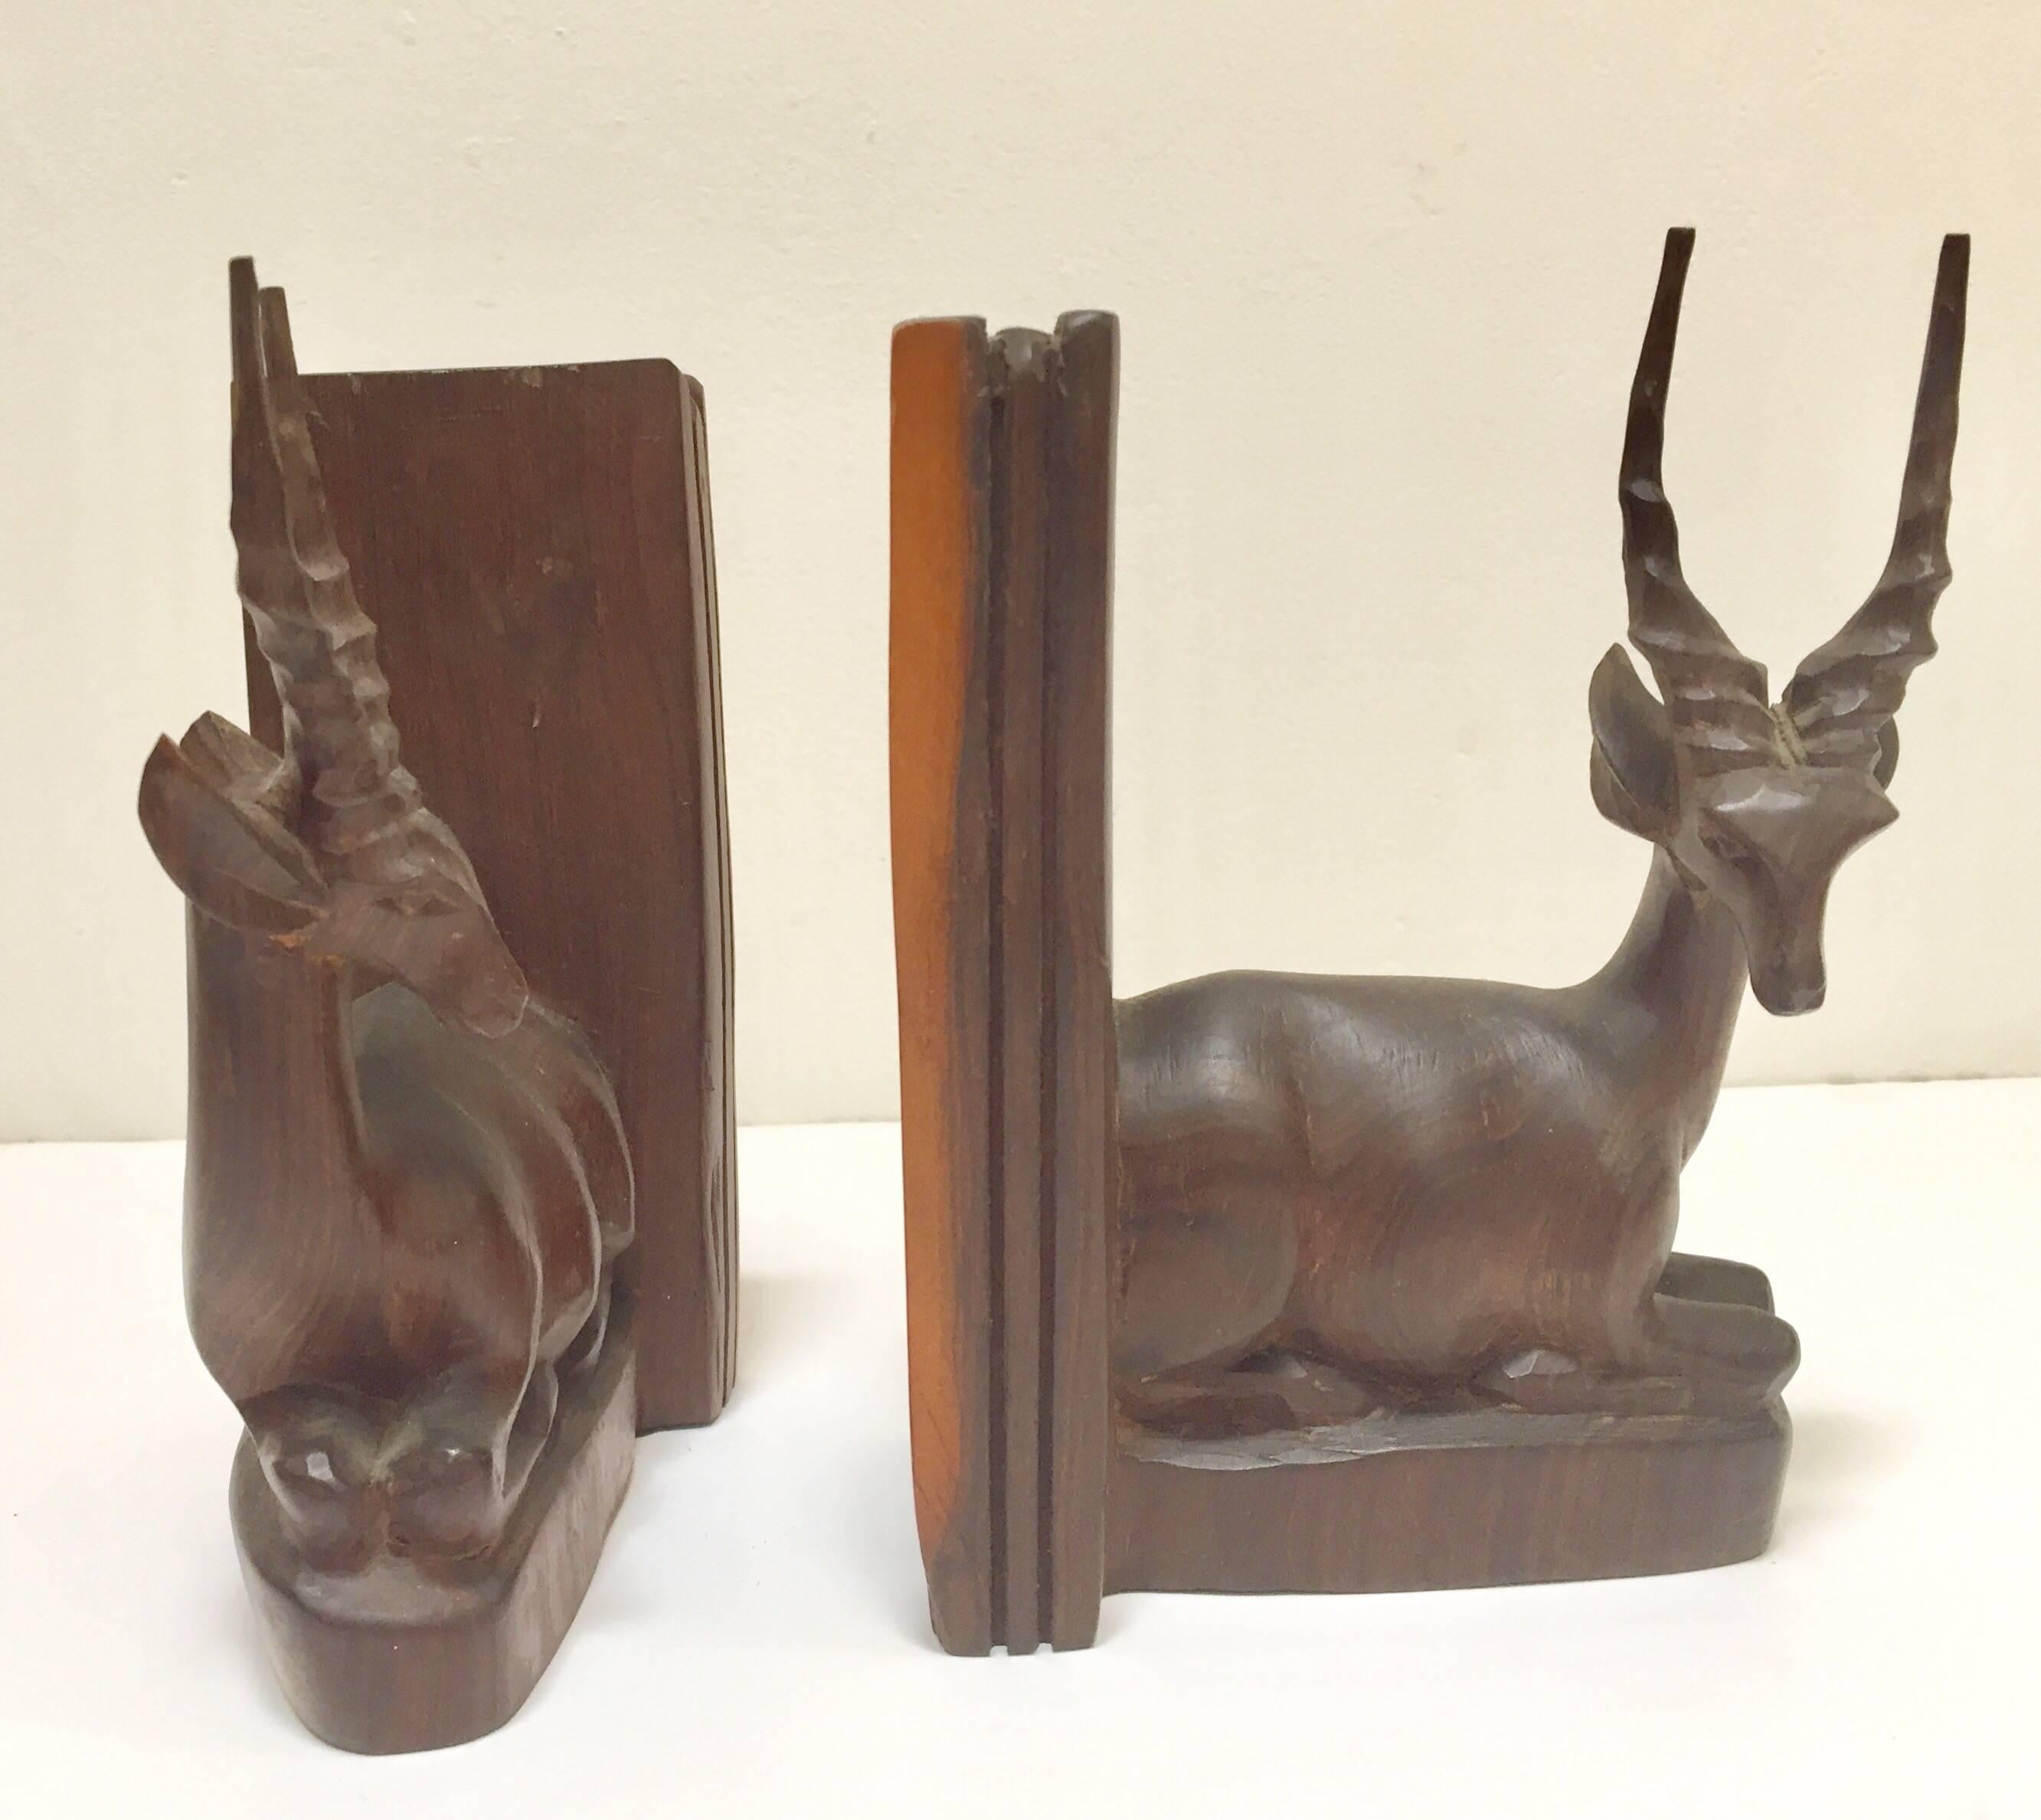 20th Century Hand-Carved Wooden Mid-Century Antelope Sculptures Bookends